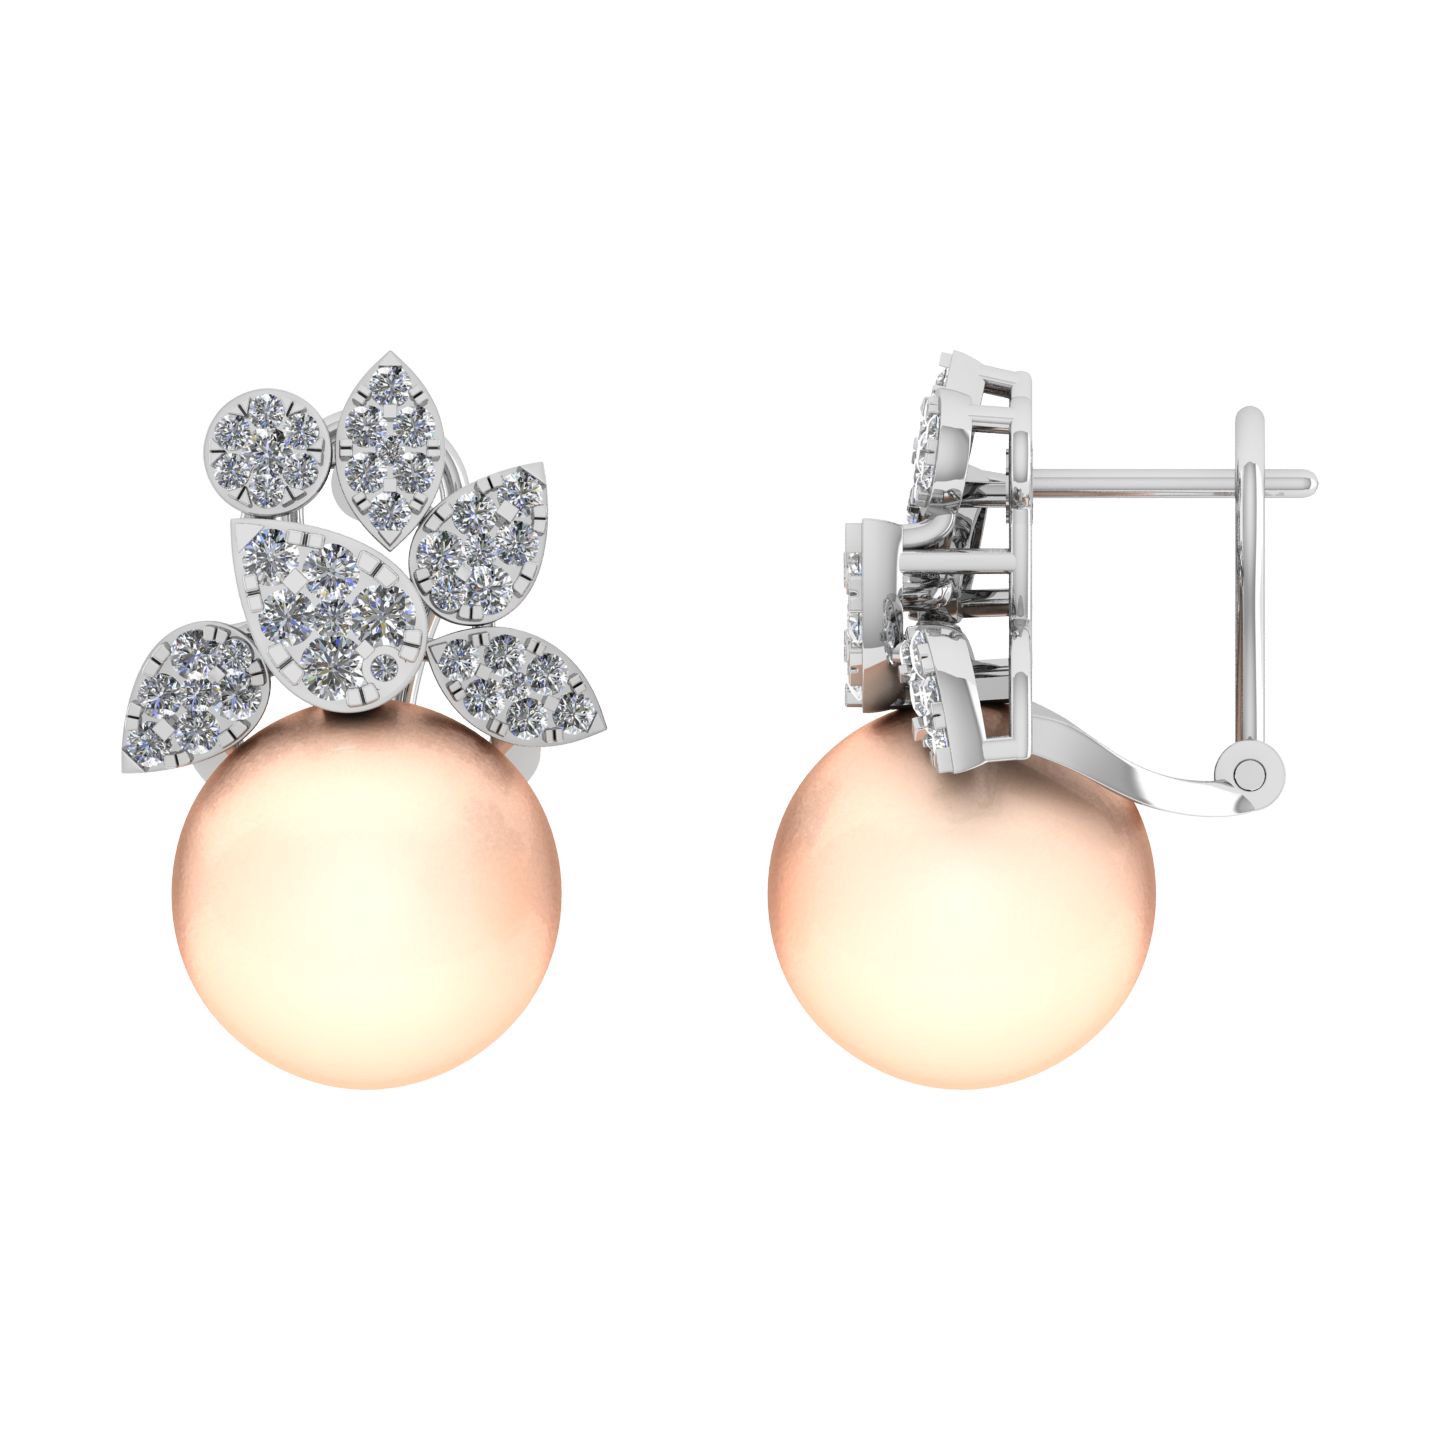 classic pearl diamond wedding earrings – a lonestar state of southern